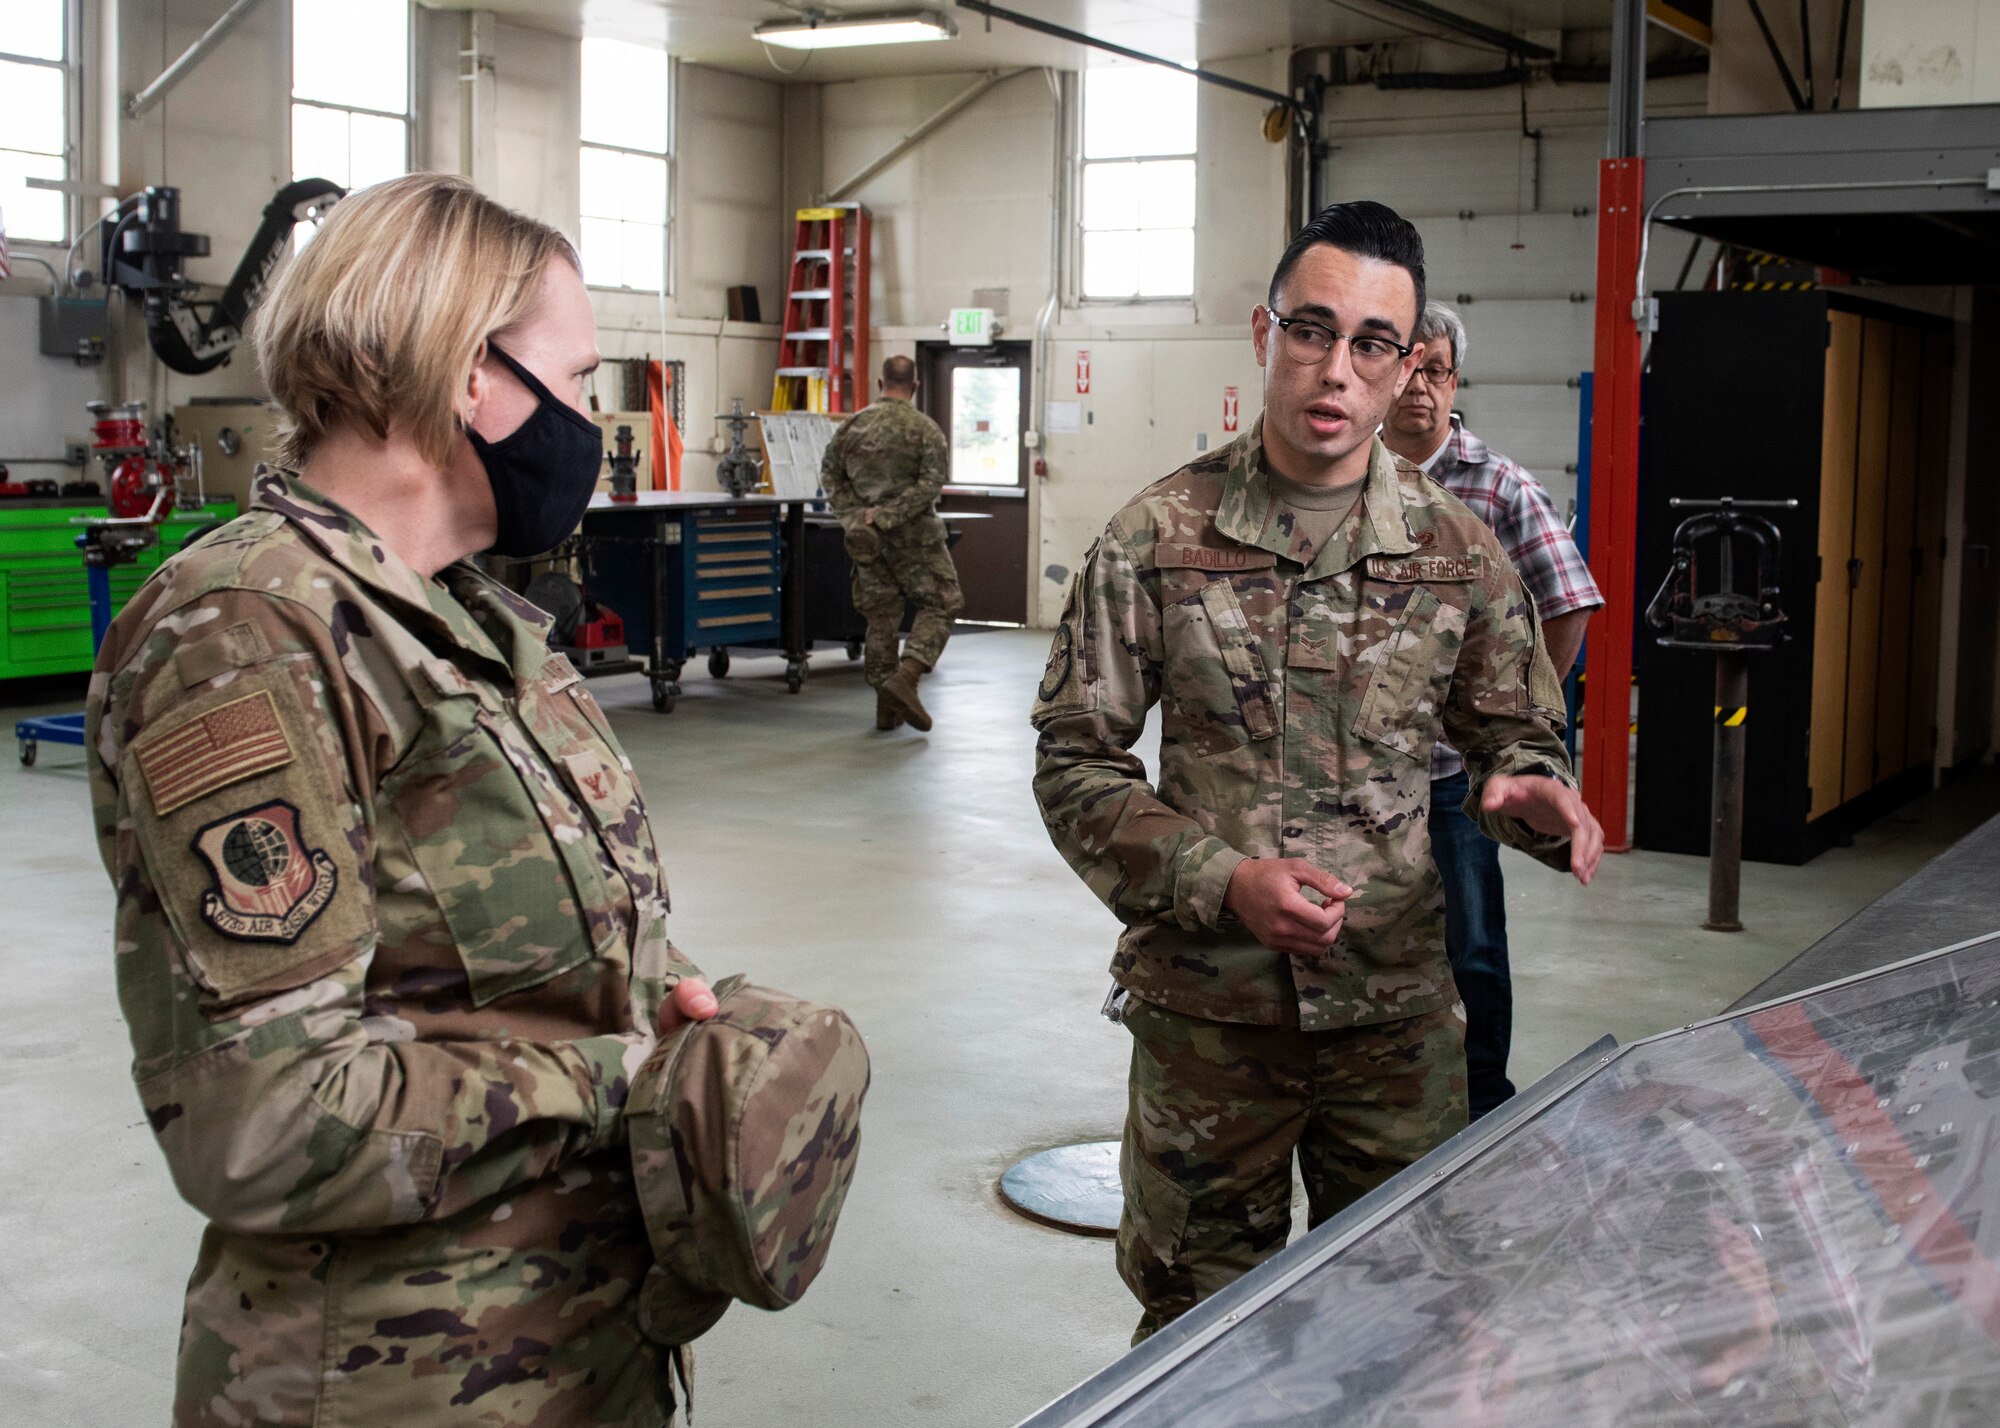 U.S. Air Force Airman 1st Class Matthew Badillo, a 773d Civil Engineer Squadron water and fuels system maintenance apprentice, briefs U.S. Air Force Col. Kirsten Aguilar, Joint Base Elmendorf-Richardson and 673d Air Base Wing commander, on liquid fuels facilities during a 773d CES immersion tour at JBER, Alaska, Sept. 1, 2020. Aguilar familiarized herself with the 773d CES and its role in supporting installation readiness after taking command of the installation on July 14, 2020. The 773d CES maintains structures throughout the base as well as runs the installation’s emergency management program.